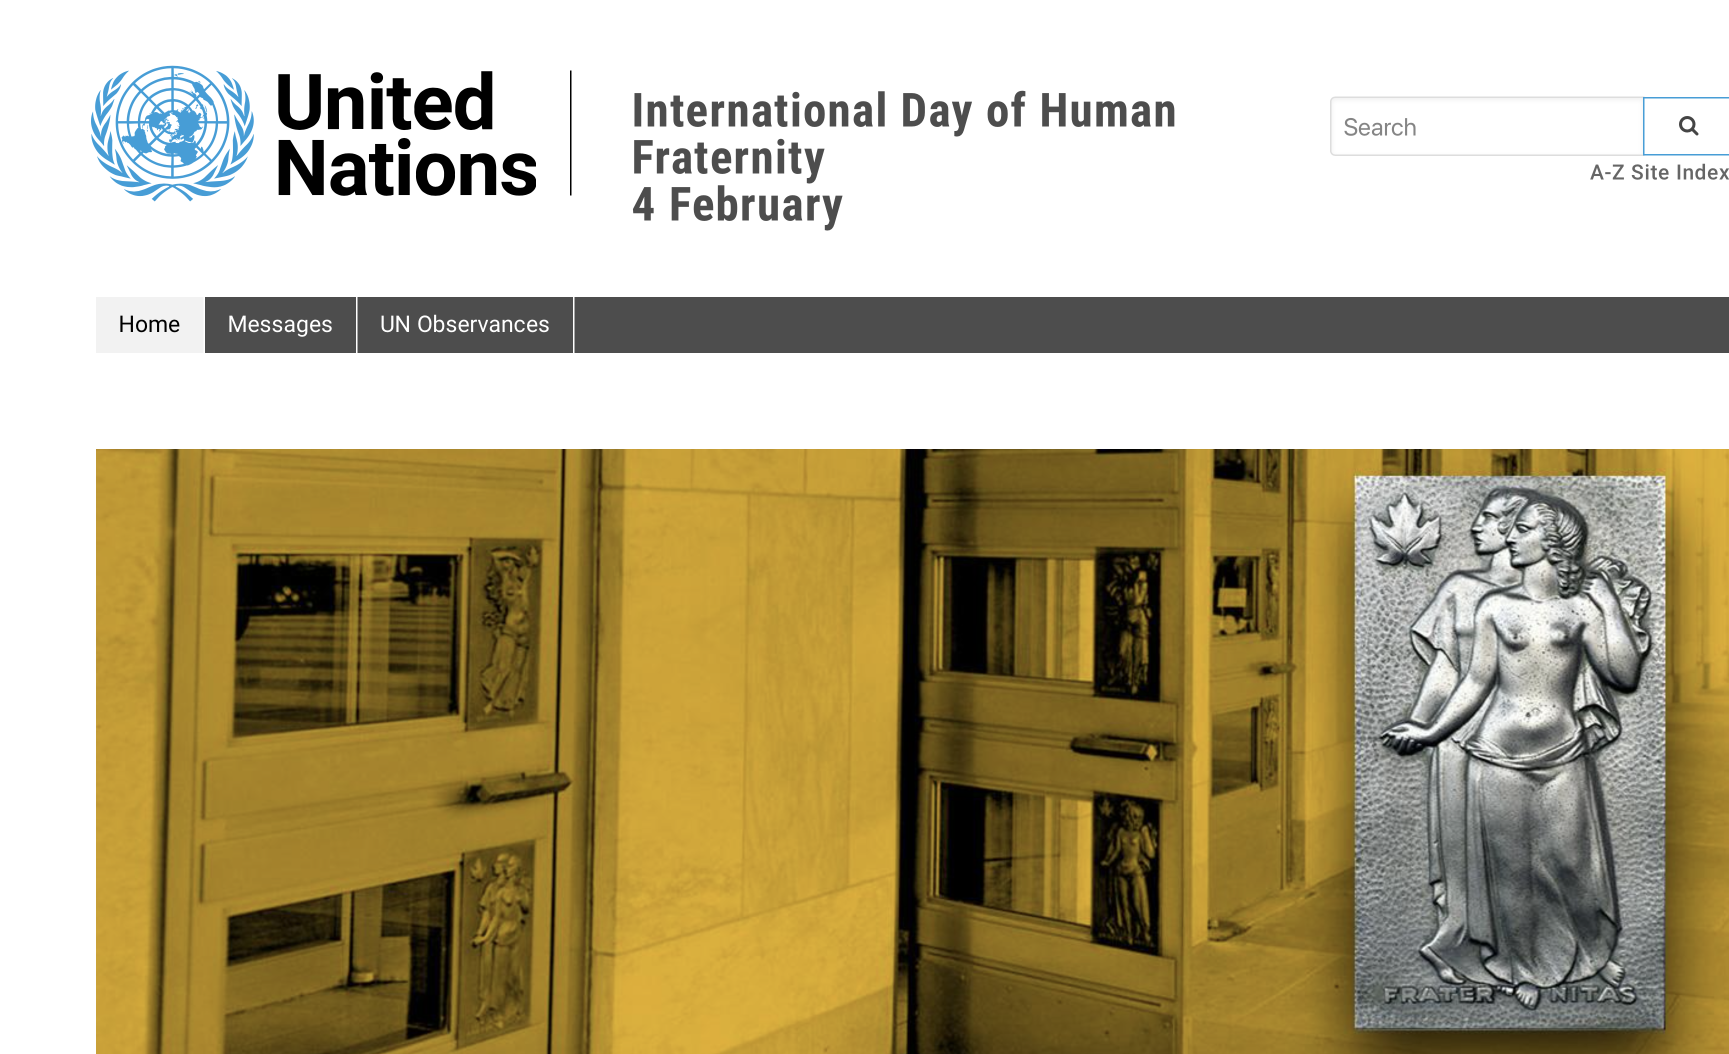 INTERNATIONAL DAY OF HUMAN FRATERNITY 2021